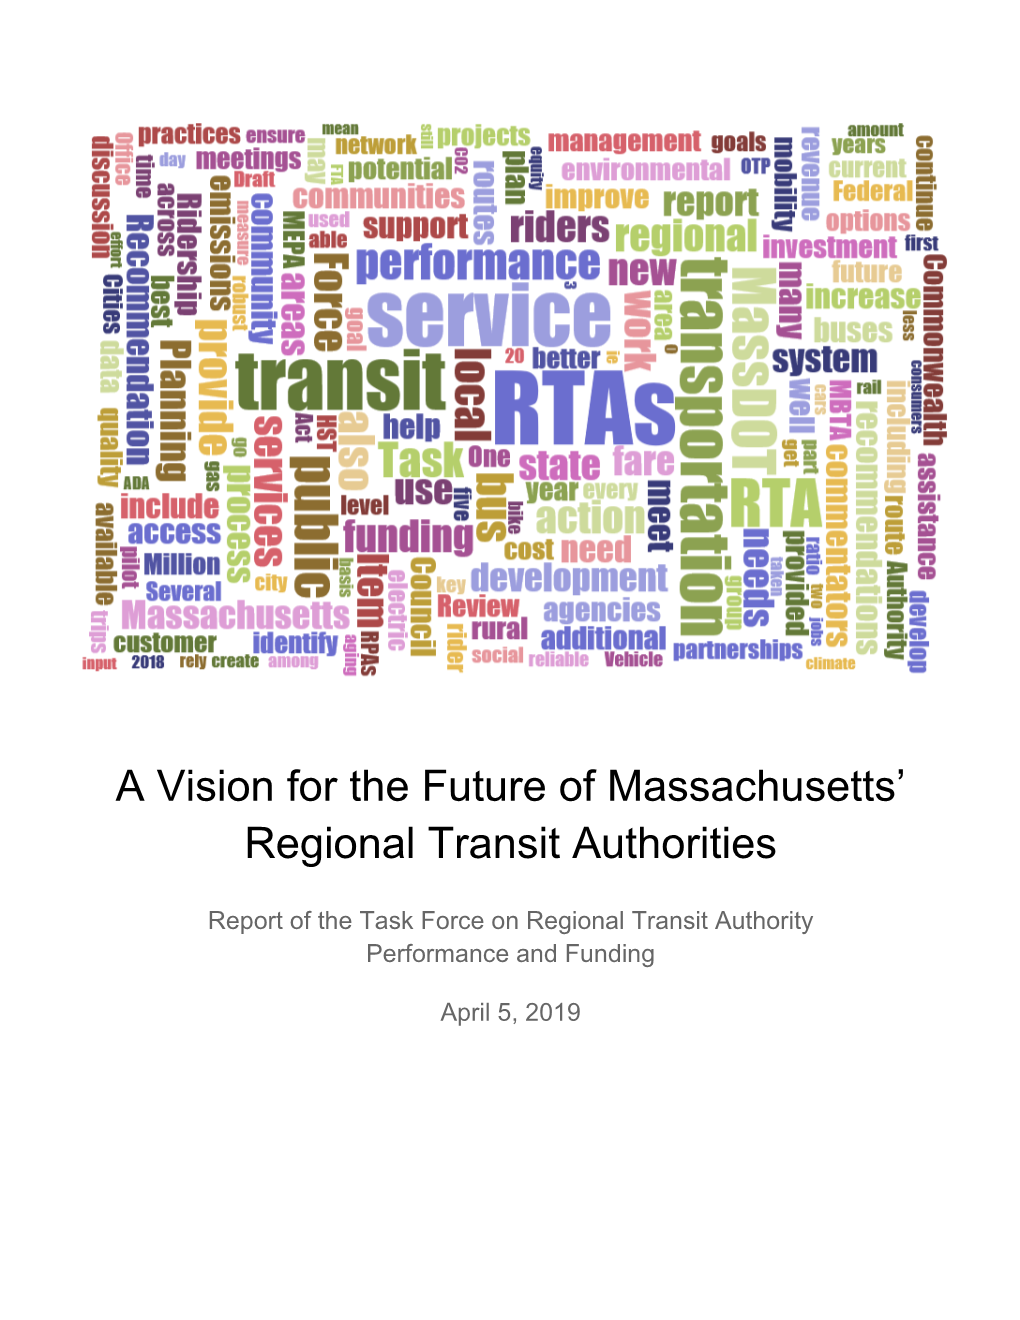 Final Report: a Vision for the Future of Massachusetts' Regional Transit